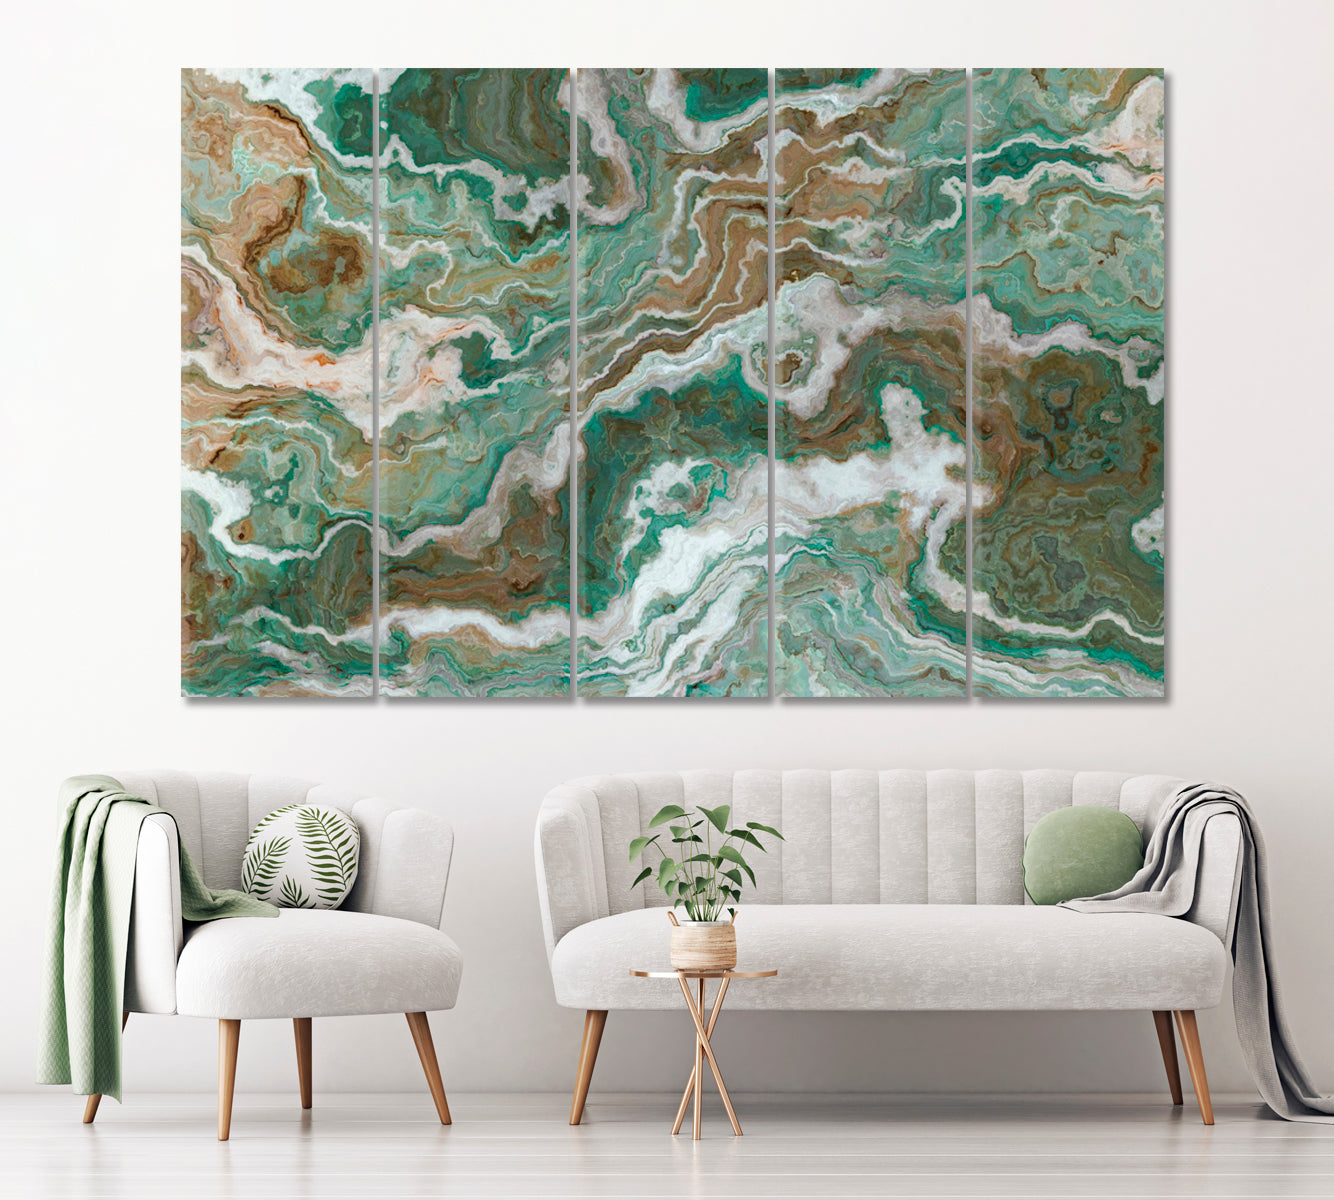 Green Marble Canvas Print ArtLexy 5 Panels 36"x24" inches 